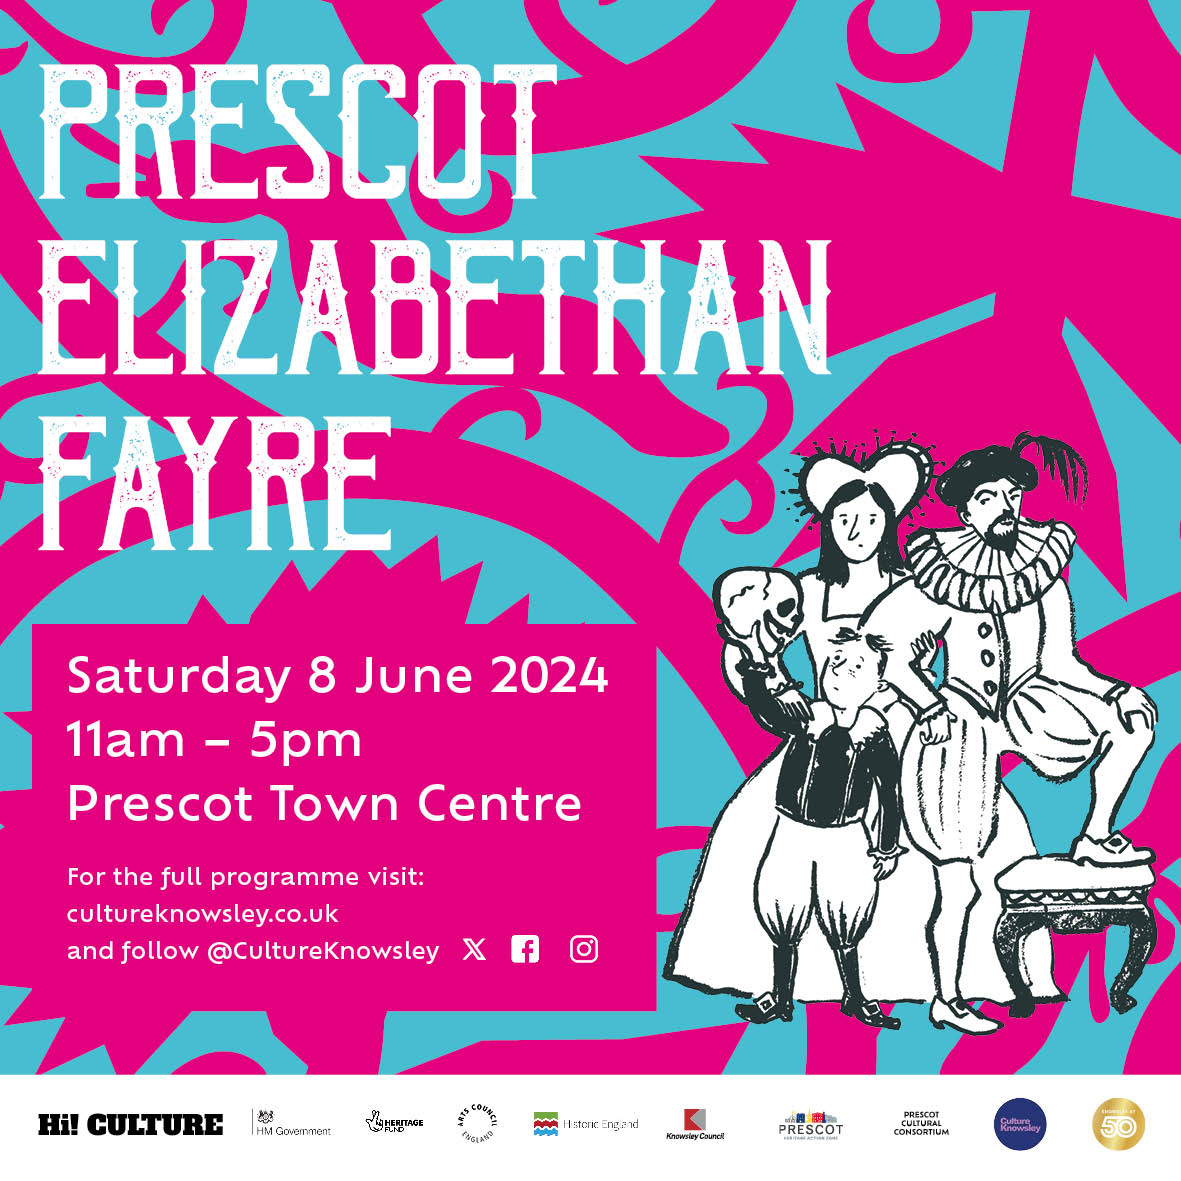 🎉 One month today! It's the Prescot #ElizabethanFayre 🎉 This brilliant fayre celebrates the town's special history and heritage and there will be plenty for everyone to enjoy. Find out more about what's happening on the day orlo.uk/rfrGm